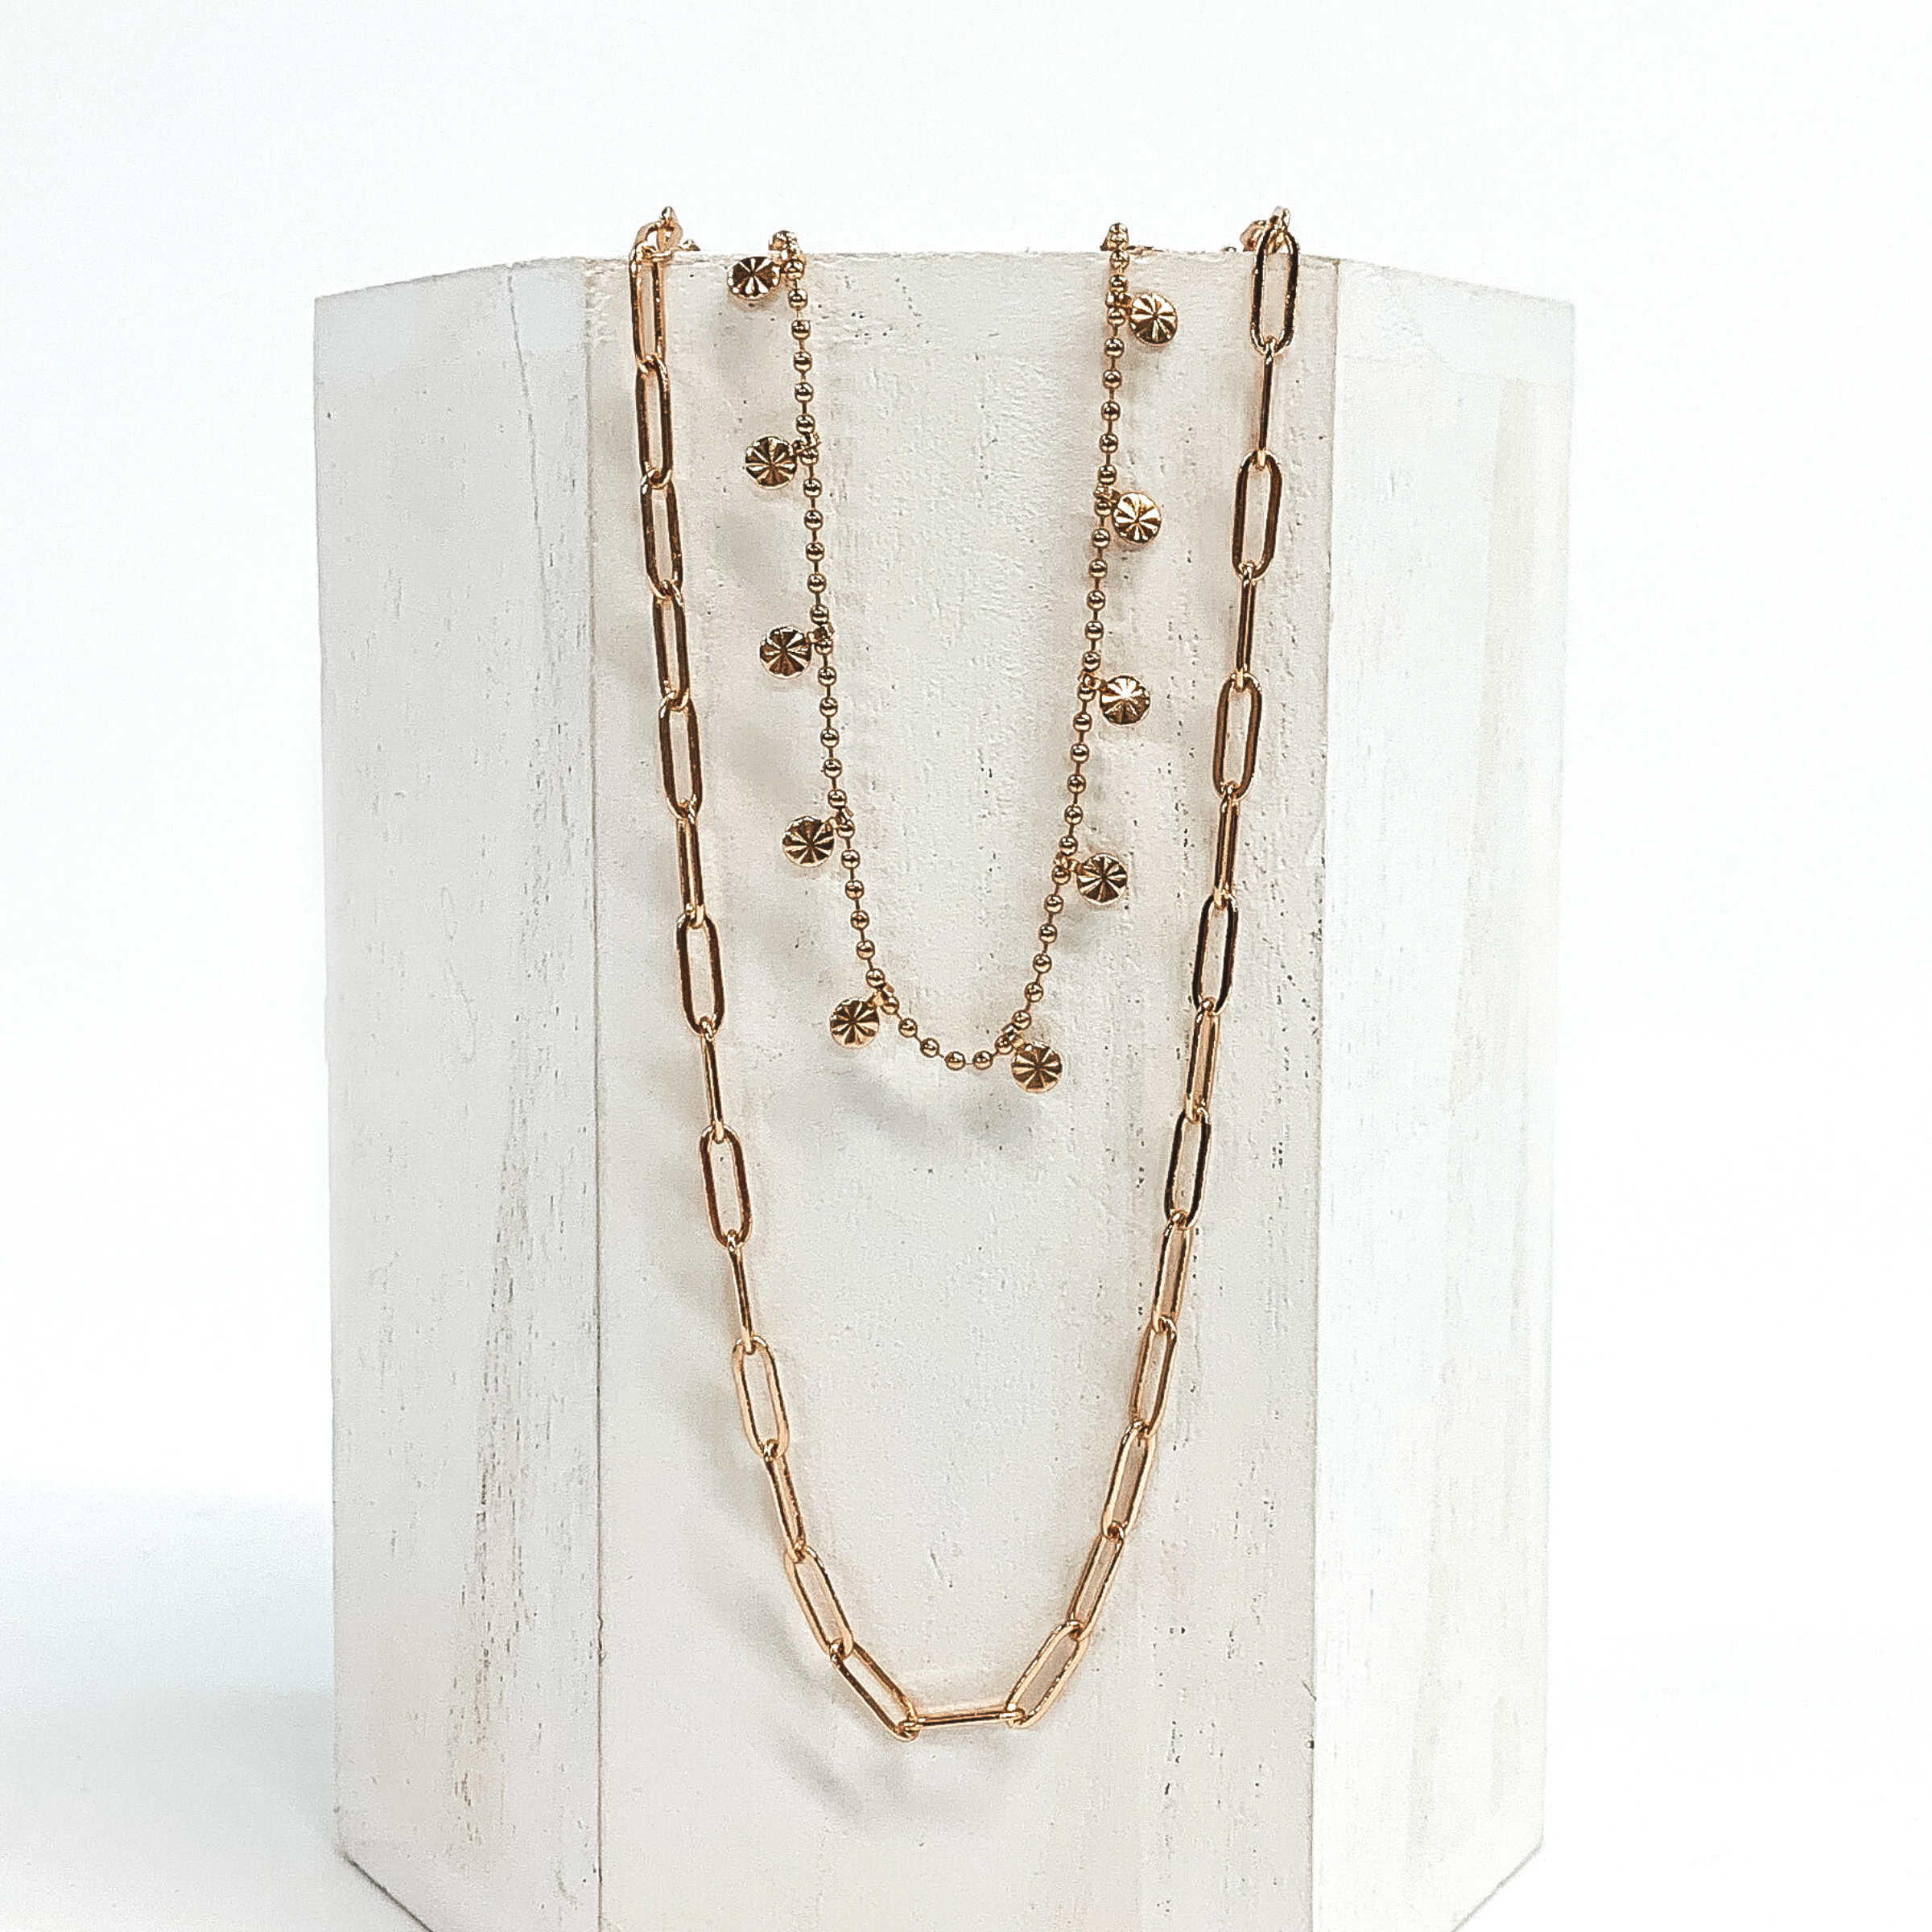 This is a gold double layered necklace. One strand is a thin paperclip chain and the second chain is a beaded chain with tiny charms with a sunburst design. This necklace is pictured on a white block and on a white background.